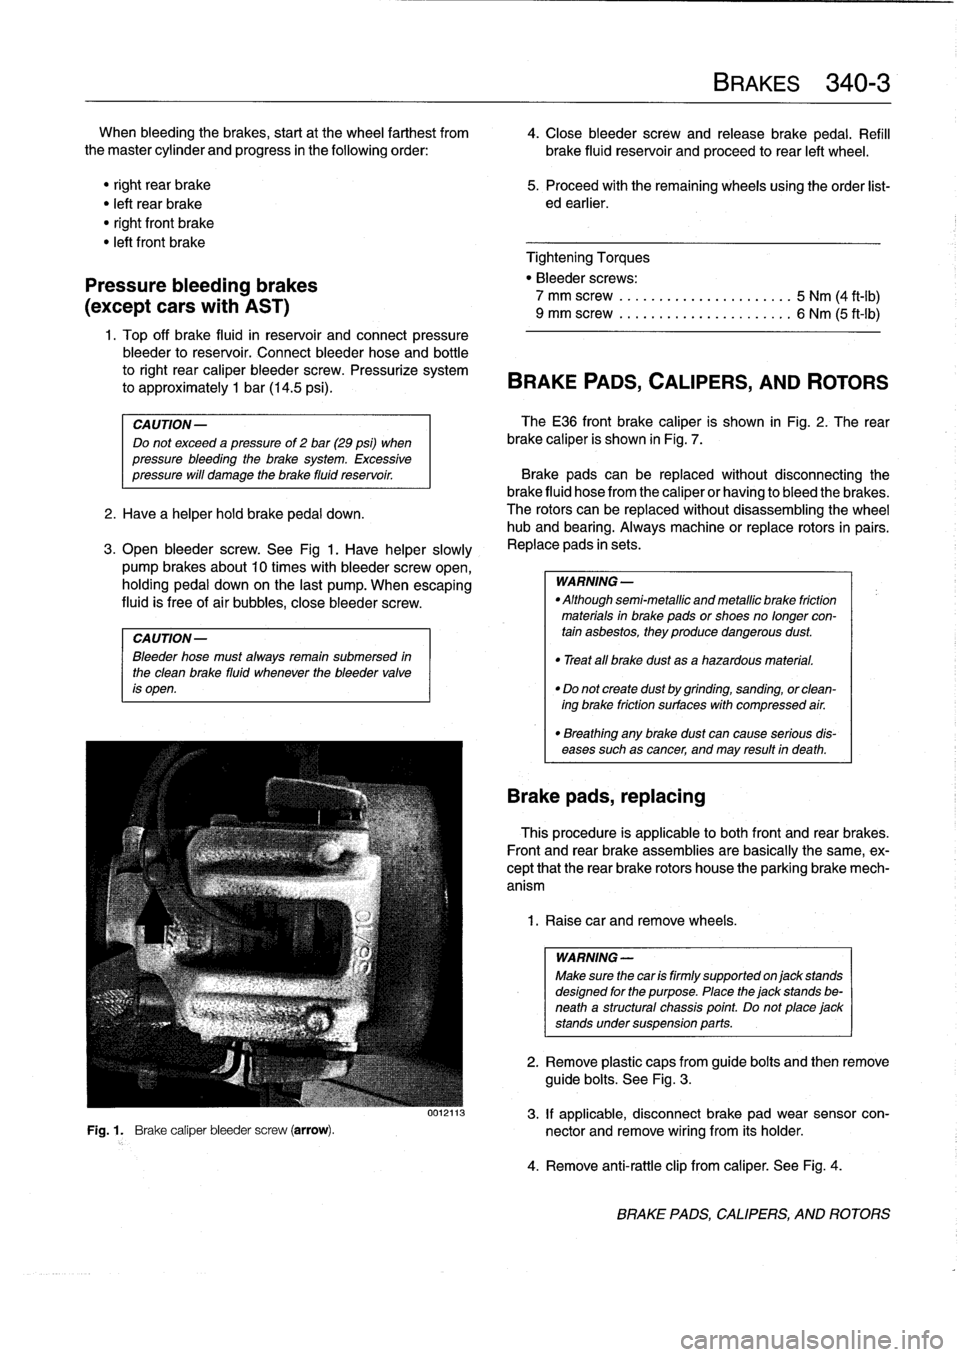 BMW 323i 1993 E36 Workshop Manual 
When
bleeding
the
brakes,
startat
the
wheel
farthest
from

	

4
.
Close
bleeder
screw
and
release
brake
pedal
.
Refill
the
master
cylinder
and
progress
in
the
following
order
:

	

brake
fluid
reserv